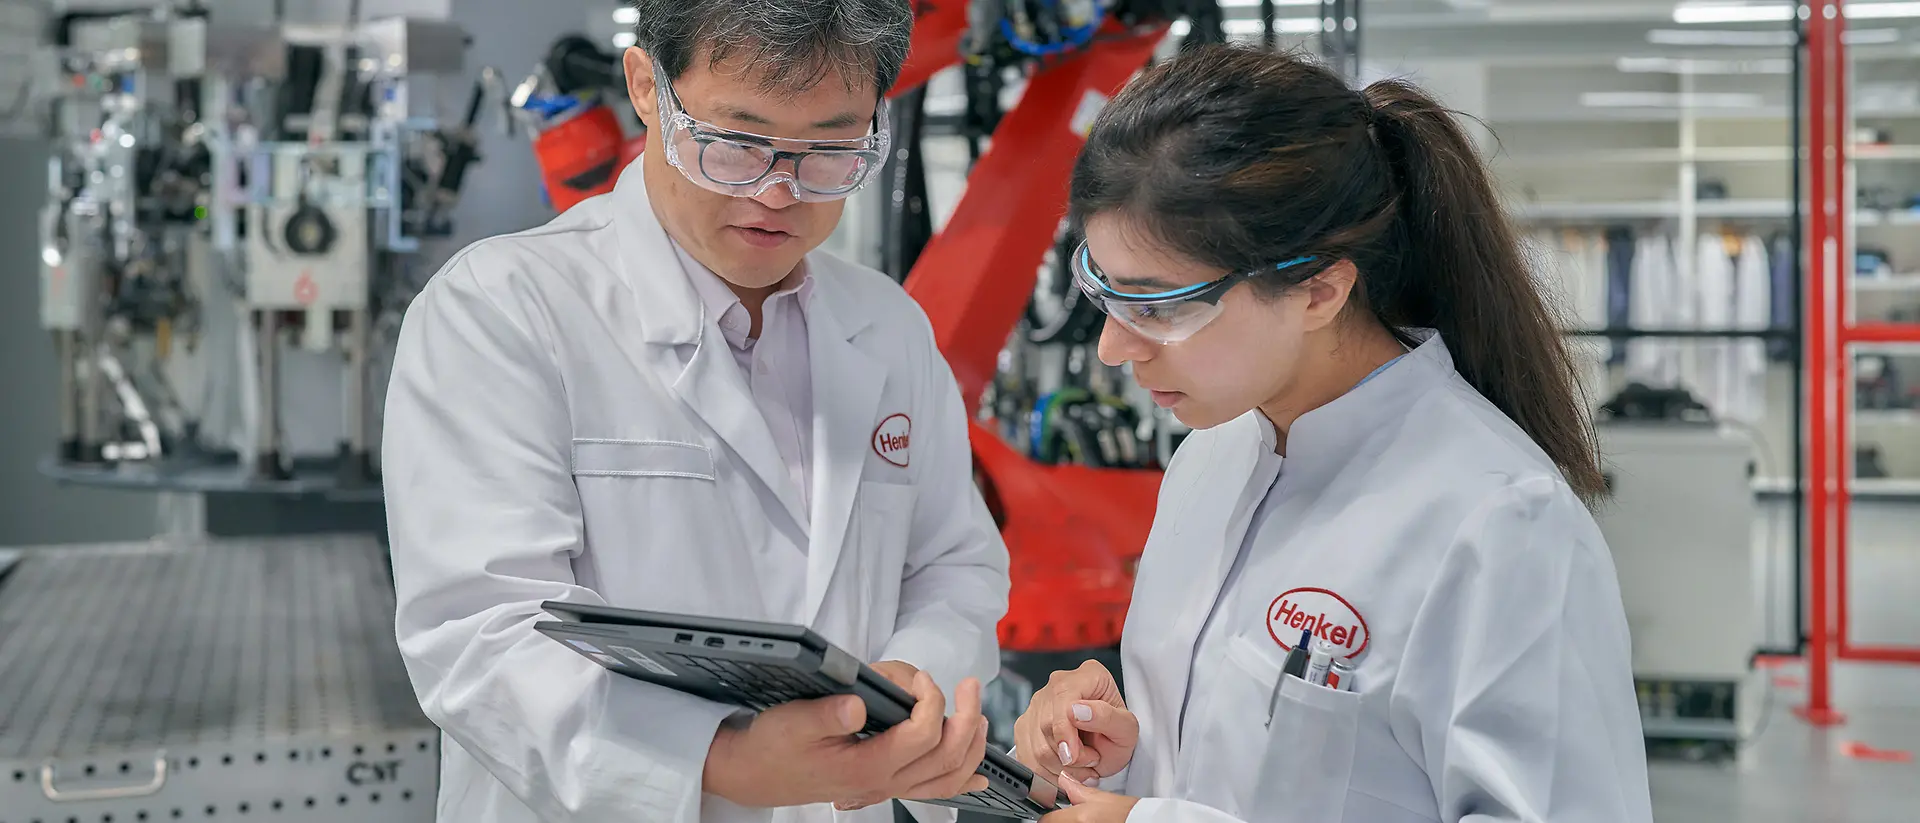 A male and a female engineers wearing white, Henkel-branded coats look at a tablet. They are inside a factory with Henkel-branded machinery.